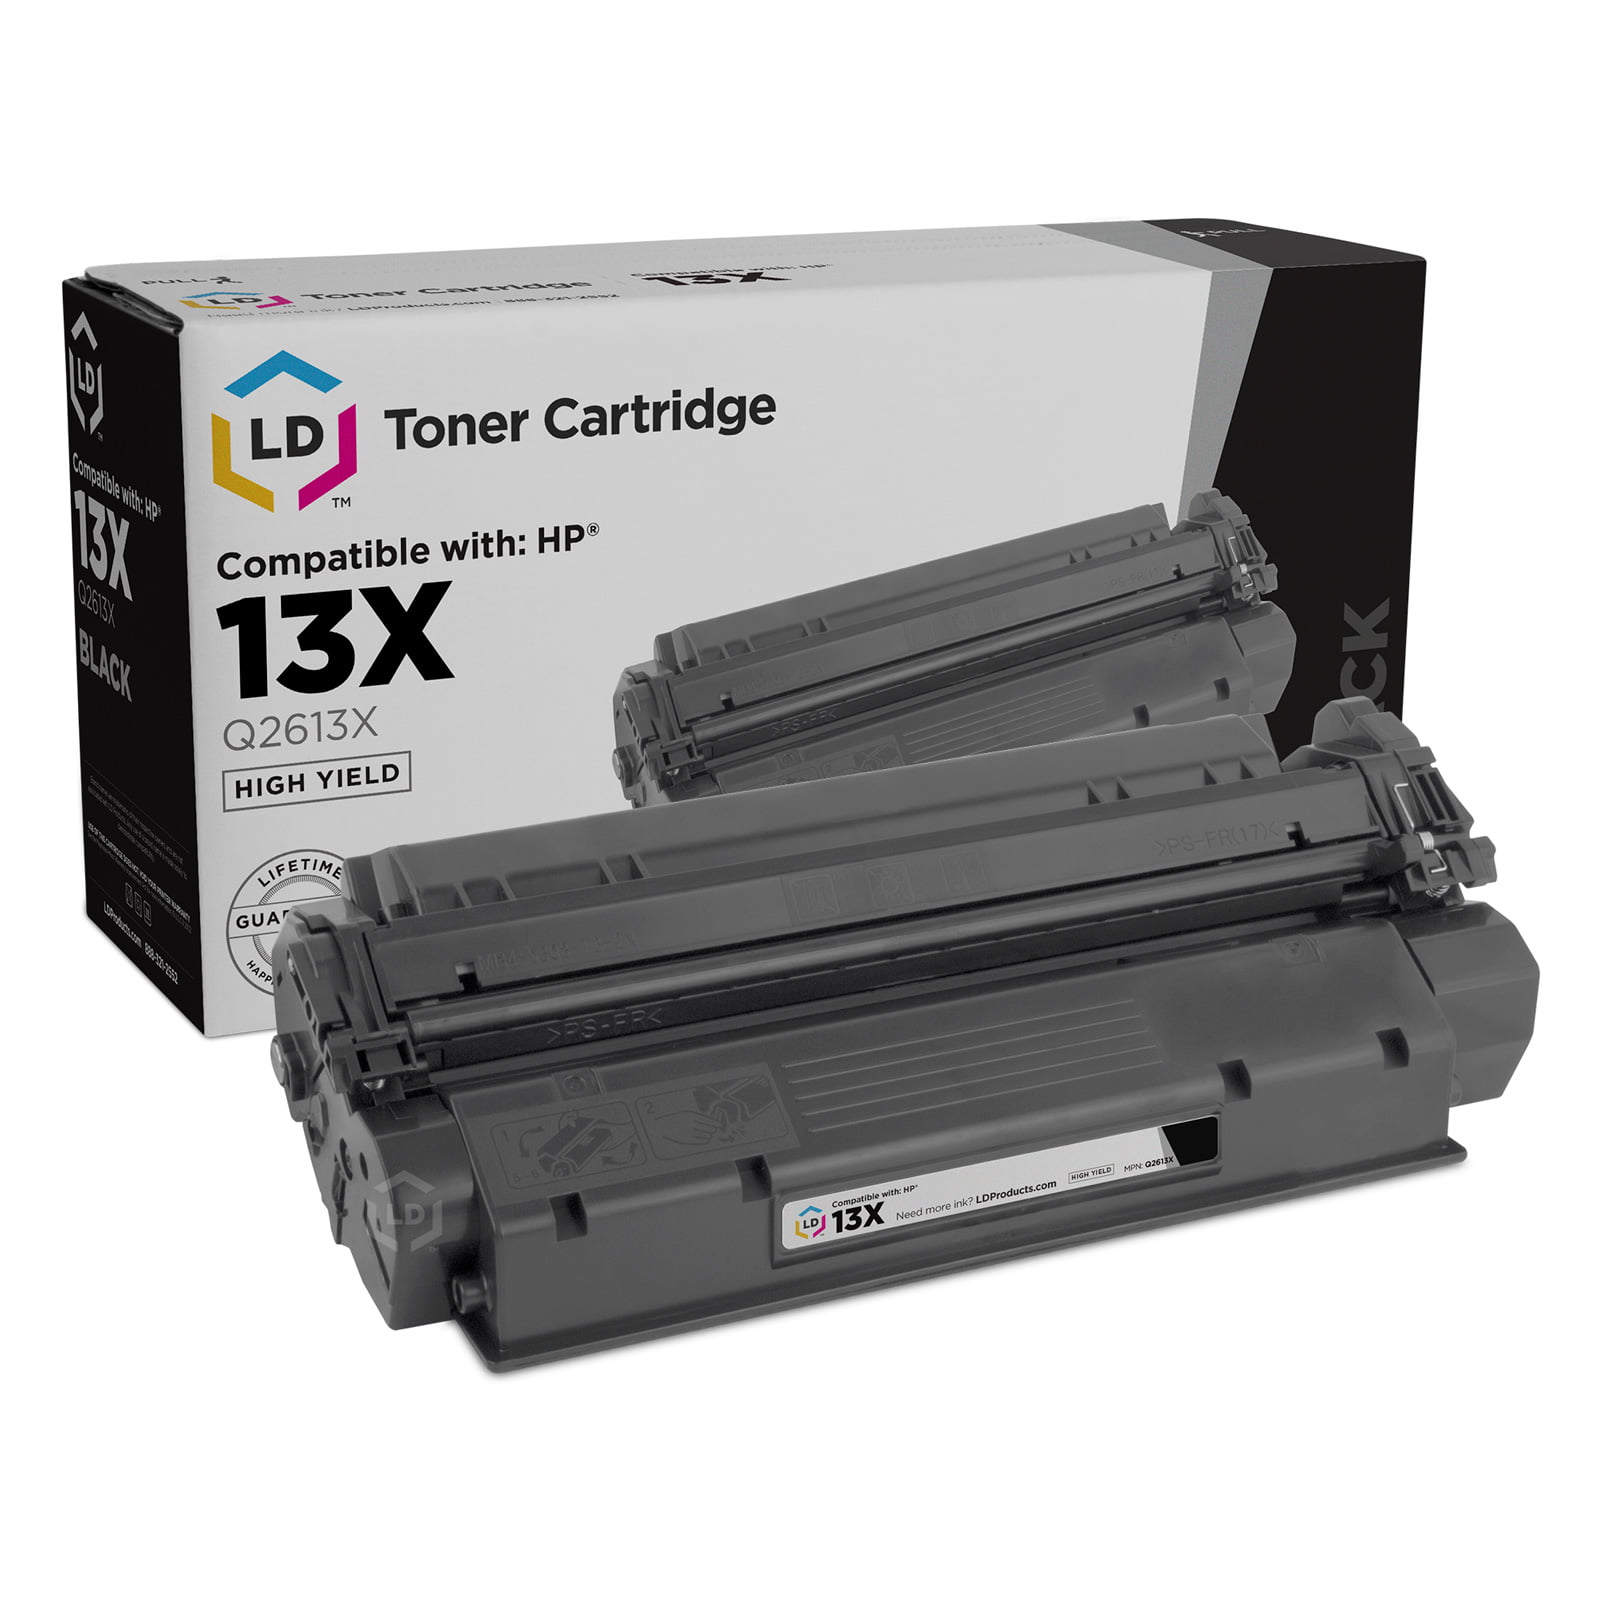 Laser Printer Cartridge use for HP Laserjet Pro 1300 1300N 1300XI Printer Black Q2613X Compatible High Yield Color Printer Toner Replacement for HP 13X 8-Pack